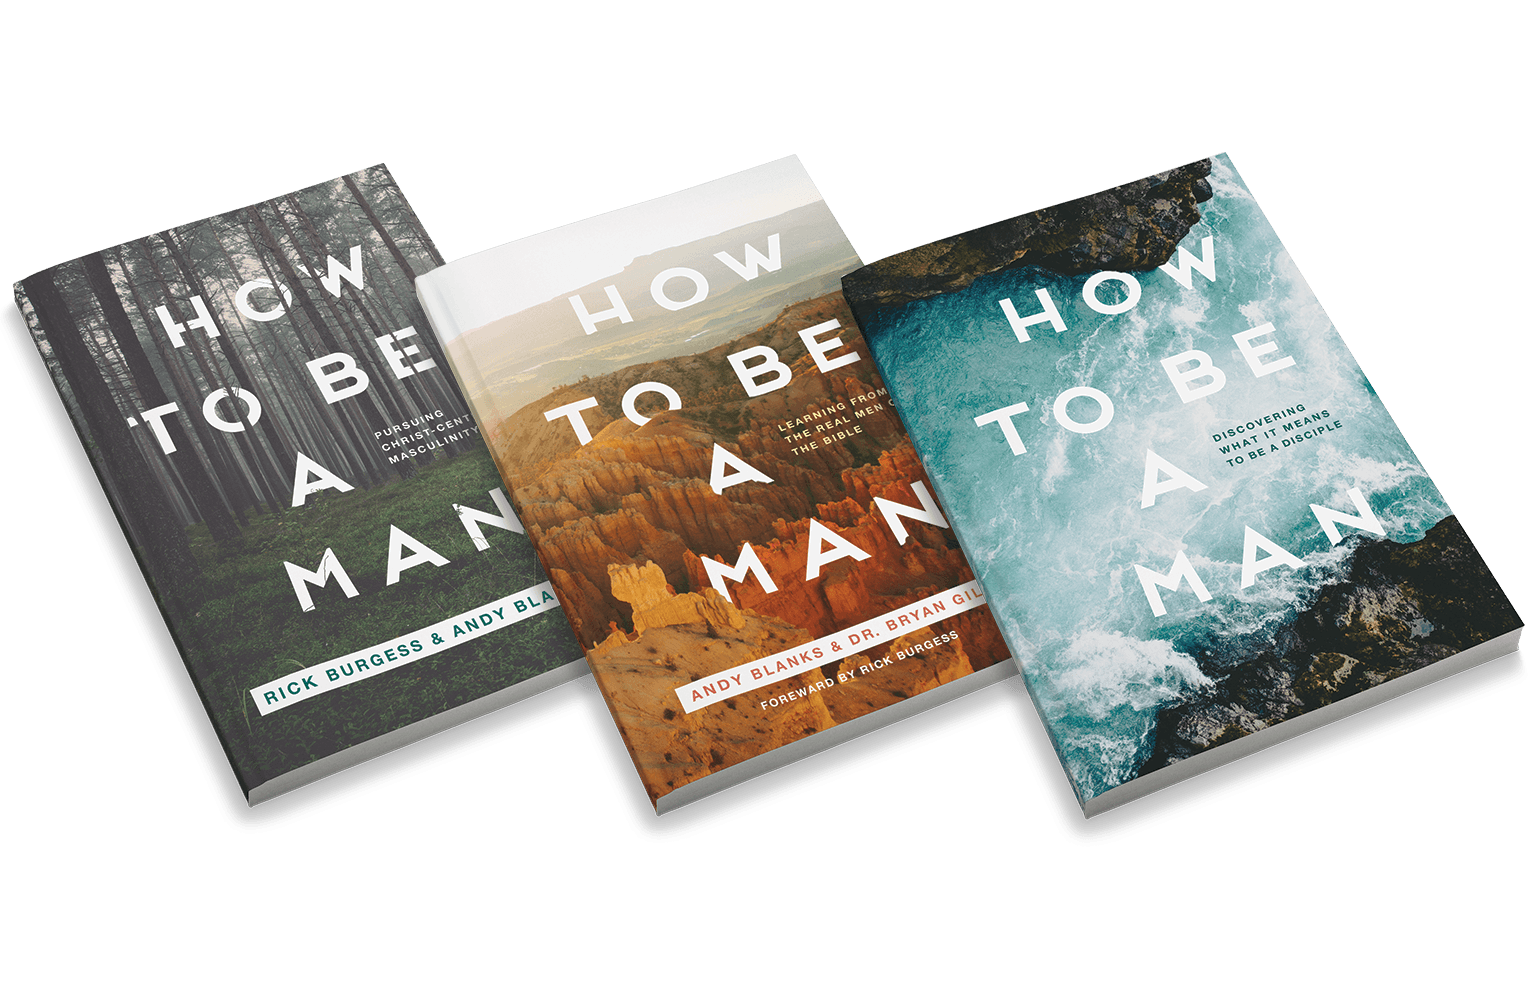 How to Be a Man: Three Book Set [Adult Edition]